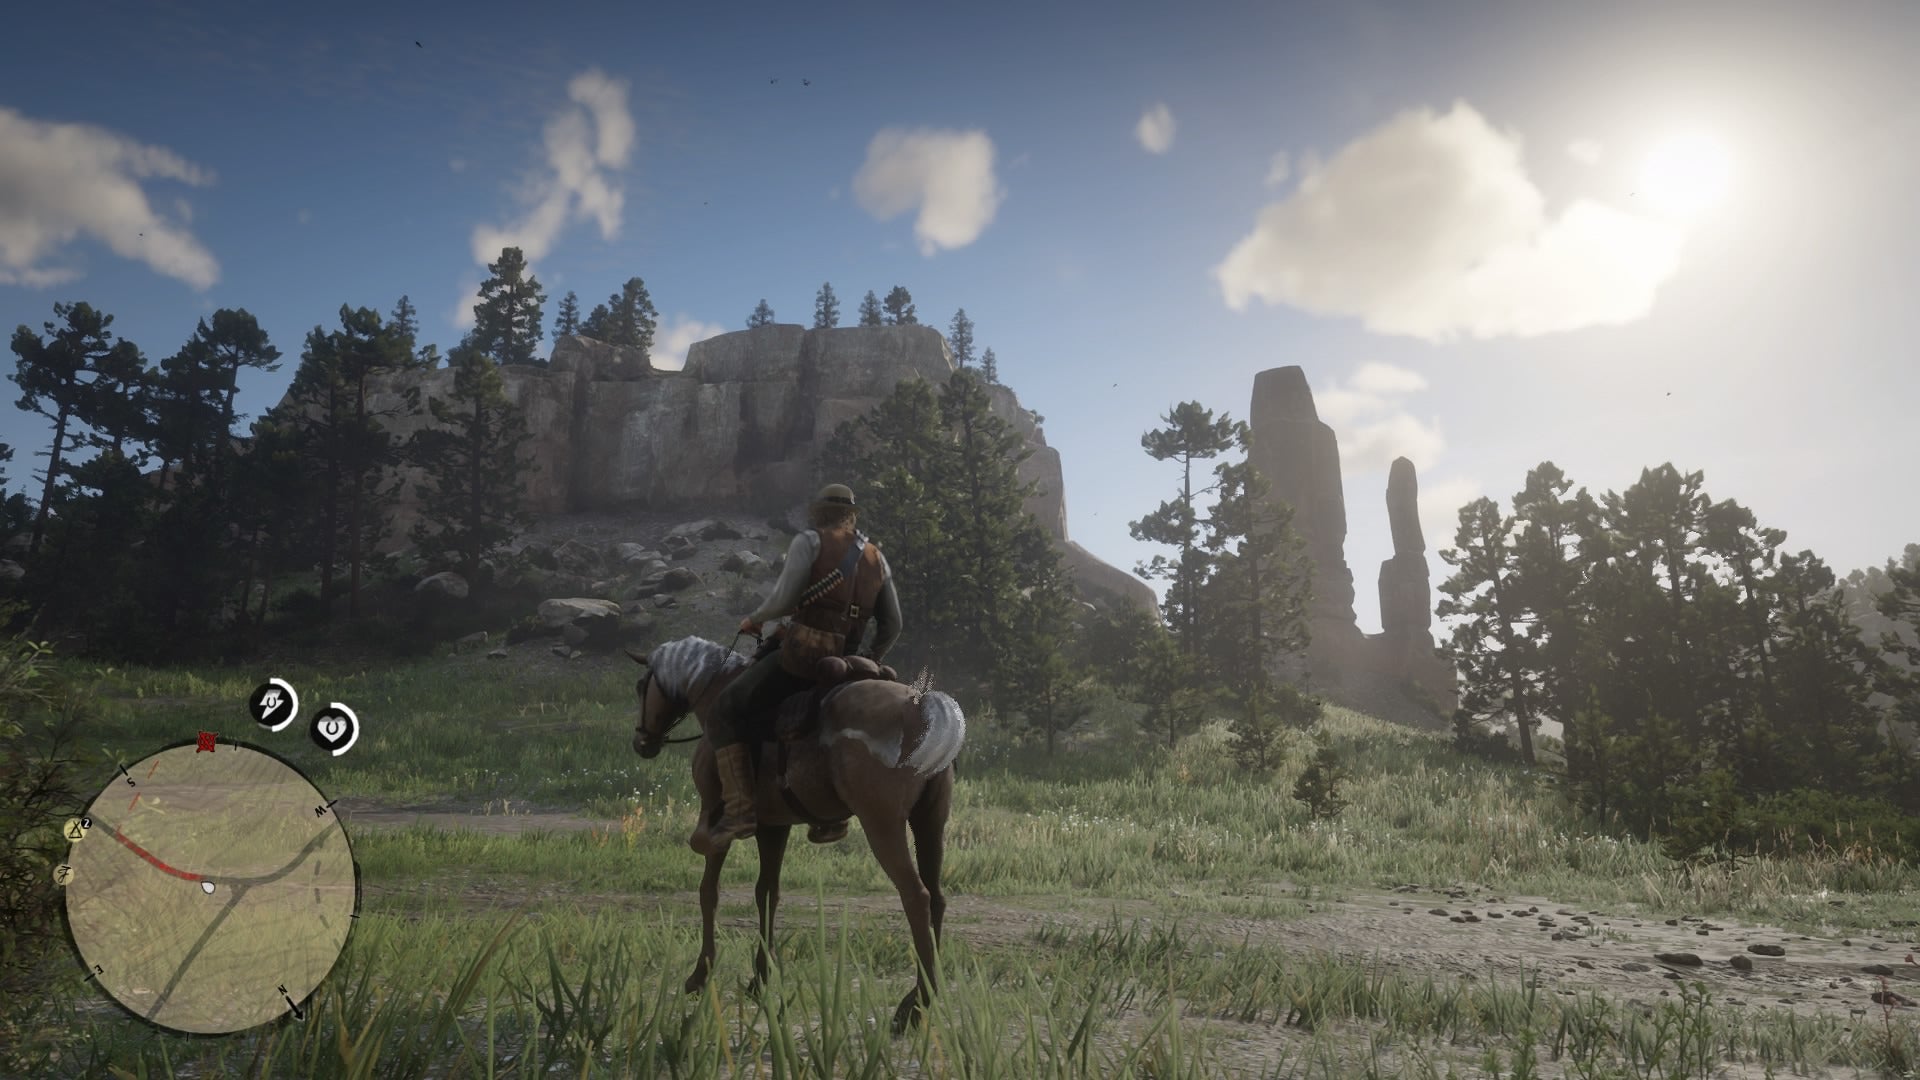 bar Cirkus parti Red Dead Redemption 2: Jack Hall Gang treasure map guide and location |  VG247